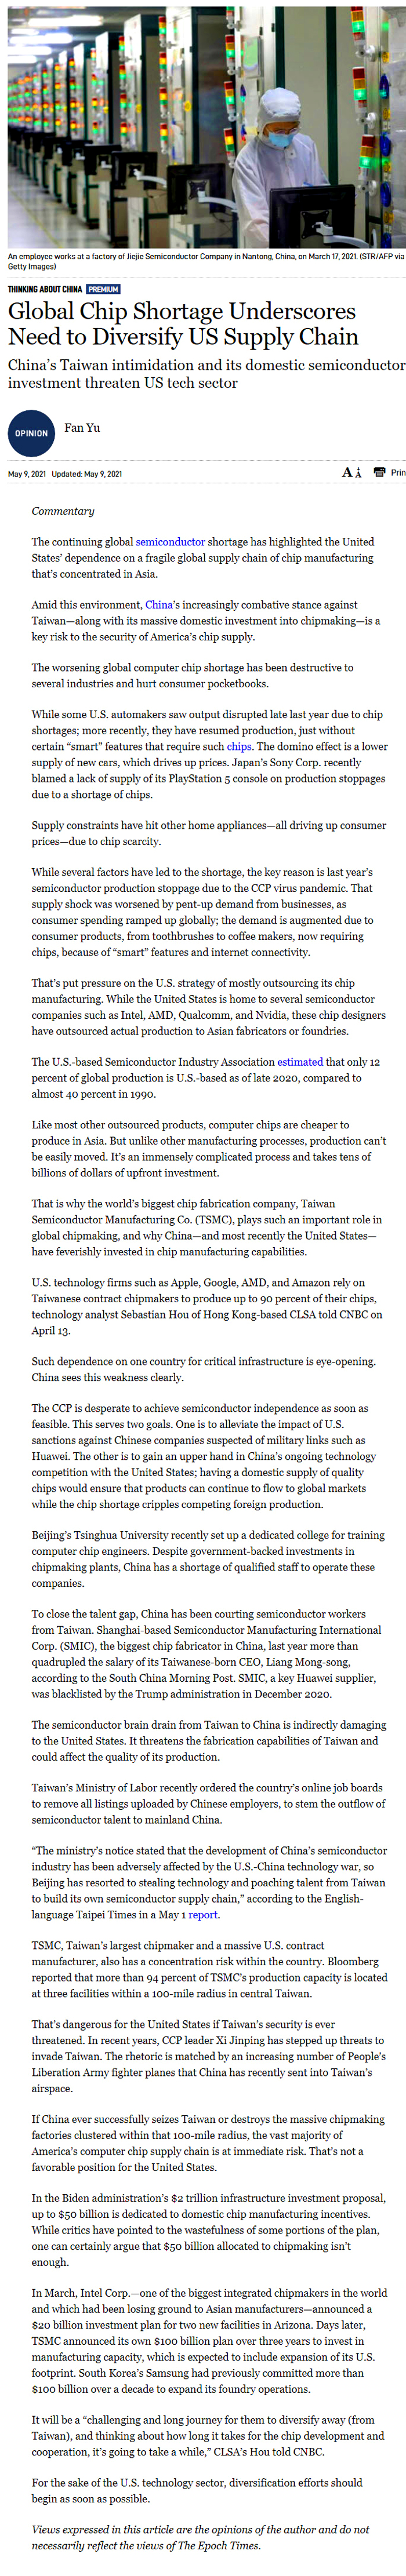 If Taiwan falls, so does American manufacturing. And CCP knows it, ready to test Biden administration. 